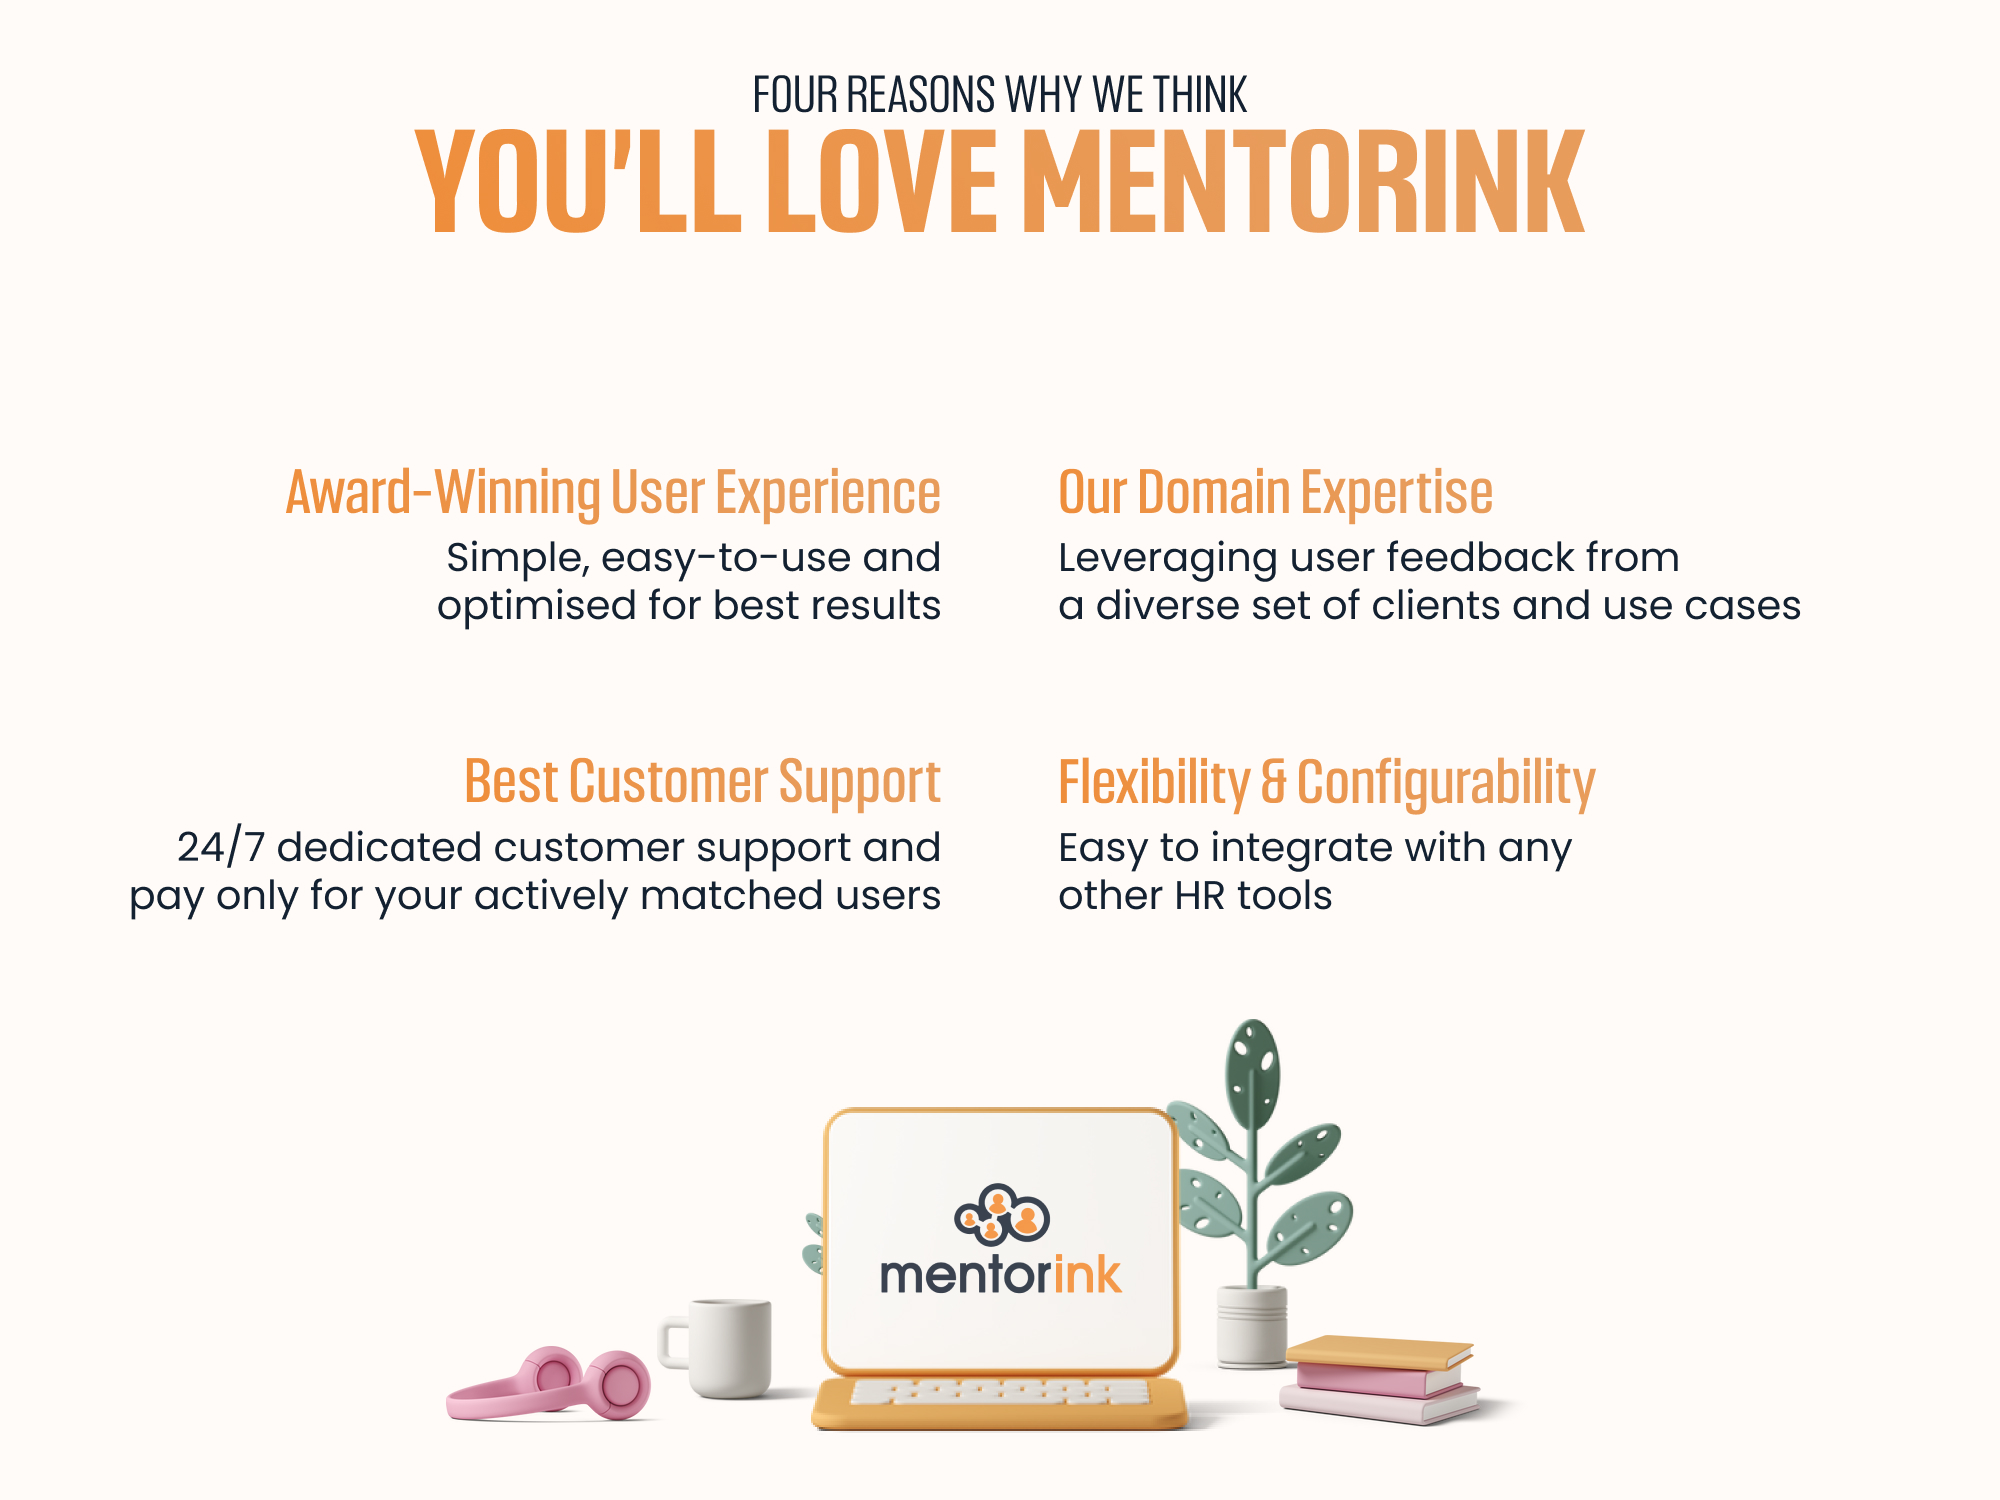 Mentorink is an online mentoring platform that enables organizations of all sizes to scale their mentoring programs and drive meaningful change. Read some of the reviews from leading organizations that trust us to deliver best-in-class mentoring programs.